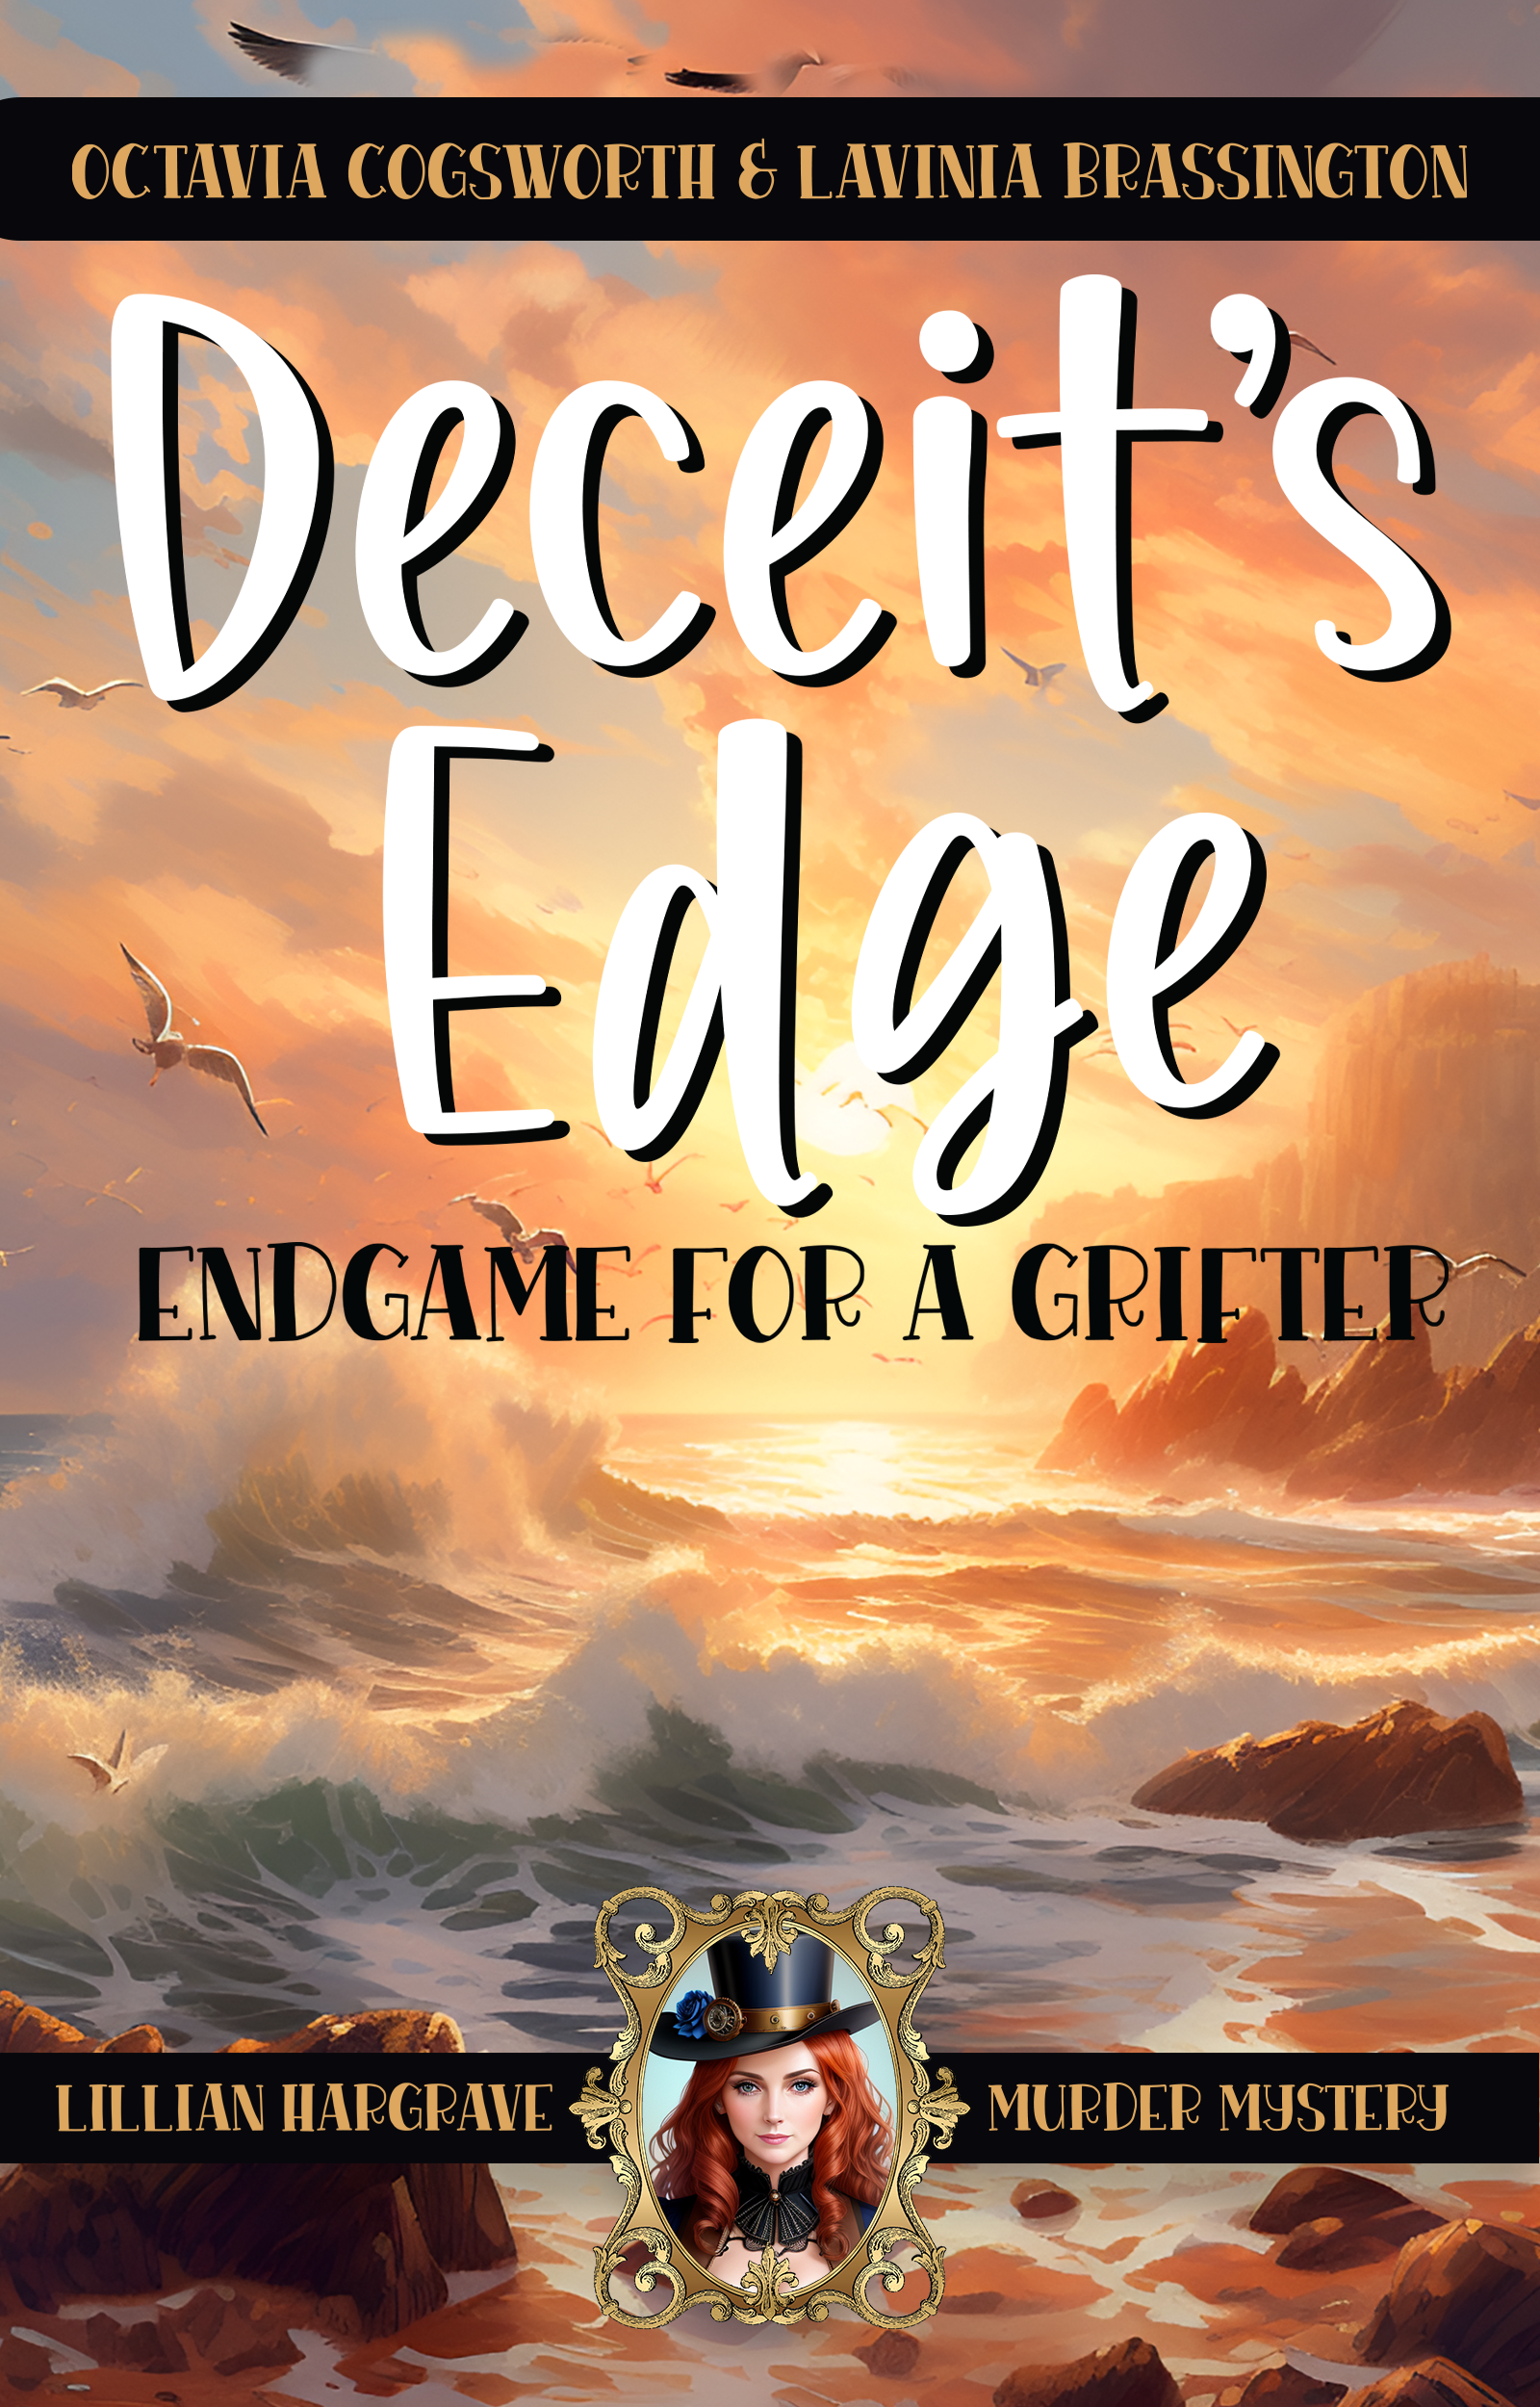 Deciet's Edge, Endgame For A Grifter by Octavia Cogsworth and Lavinia Brassington